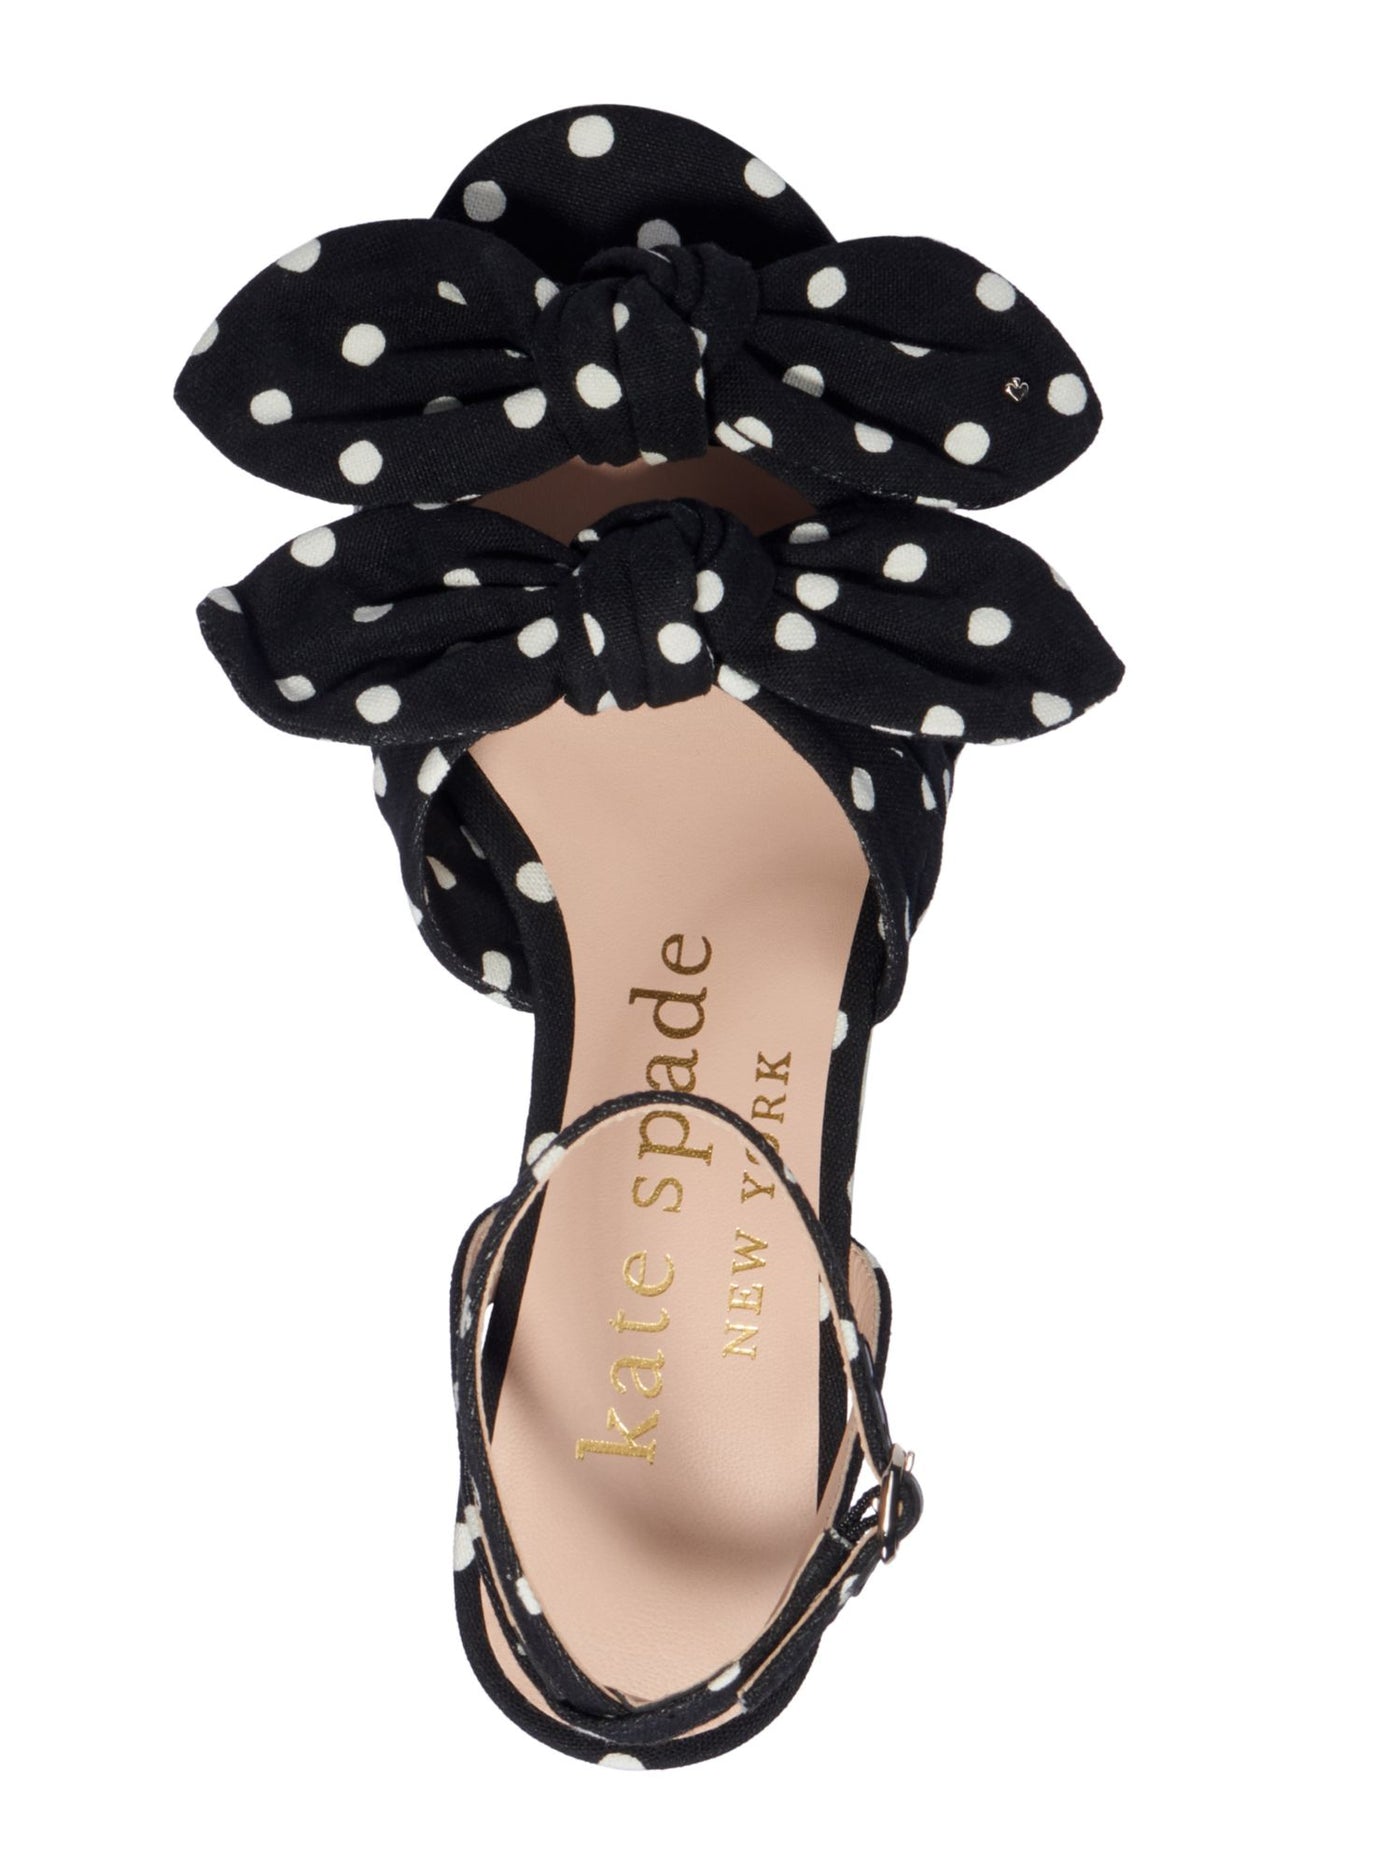 KATE SPADE NEW YORK Womens Black/French Cream Polka Dot Double Bow Cork Ankle Strap Cushioned Julep Round Toe Wedge Buckle Dress Sandals Shoes B